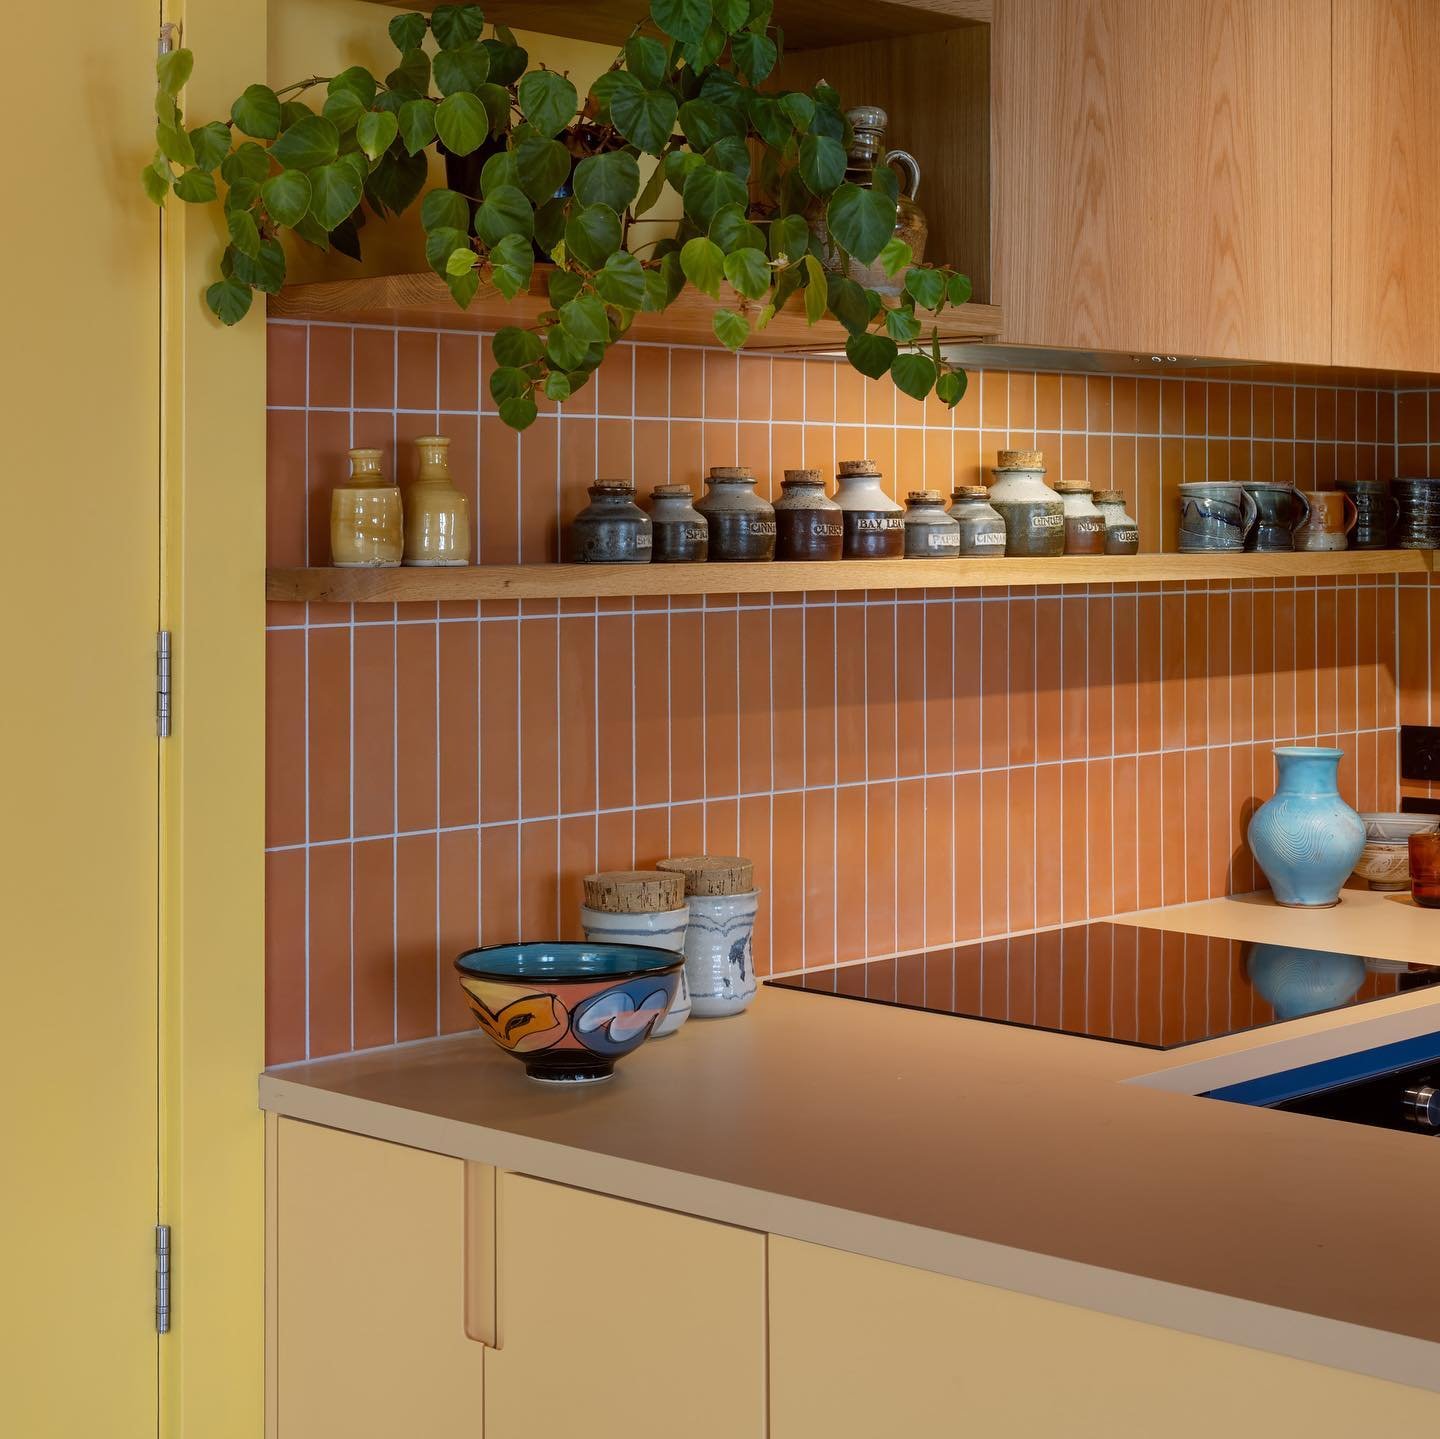 This kitchen, designed by @pacstudio and made by us, proves how cleverly designed small spaces can make a big impact. We particularly love the materials, palette and design details that playfully reference the architect Franz Iseke&rsquo;s modernist 